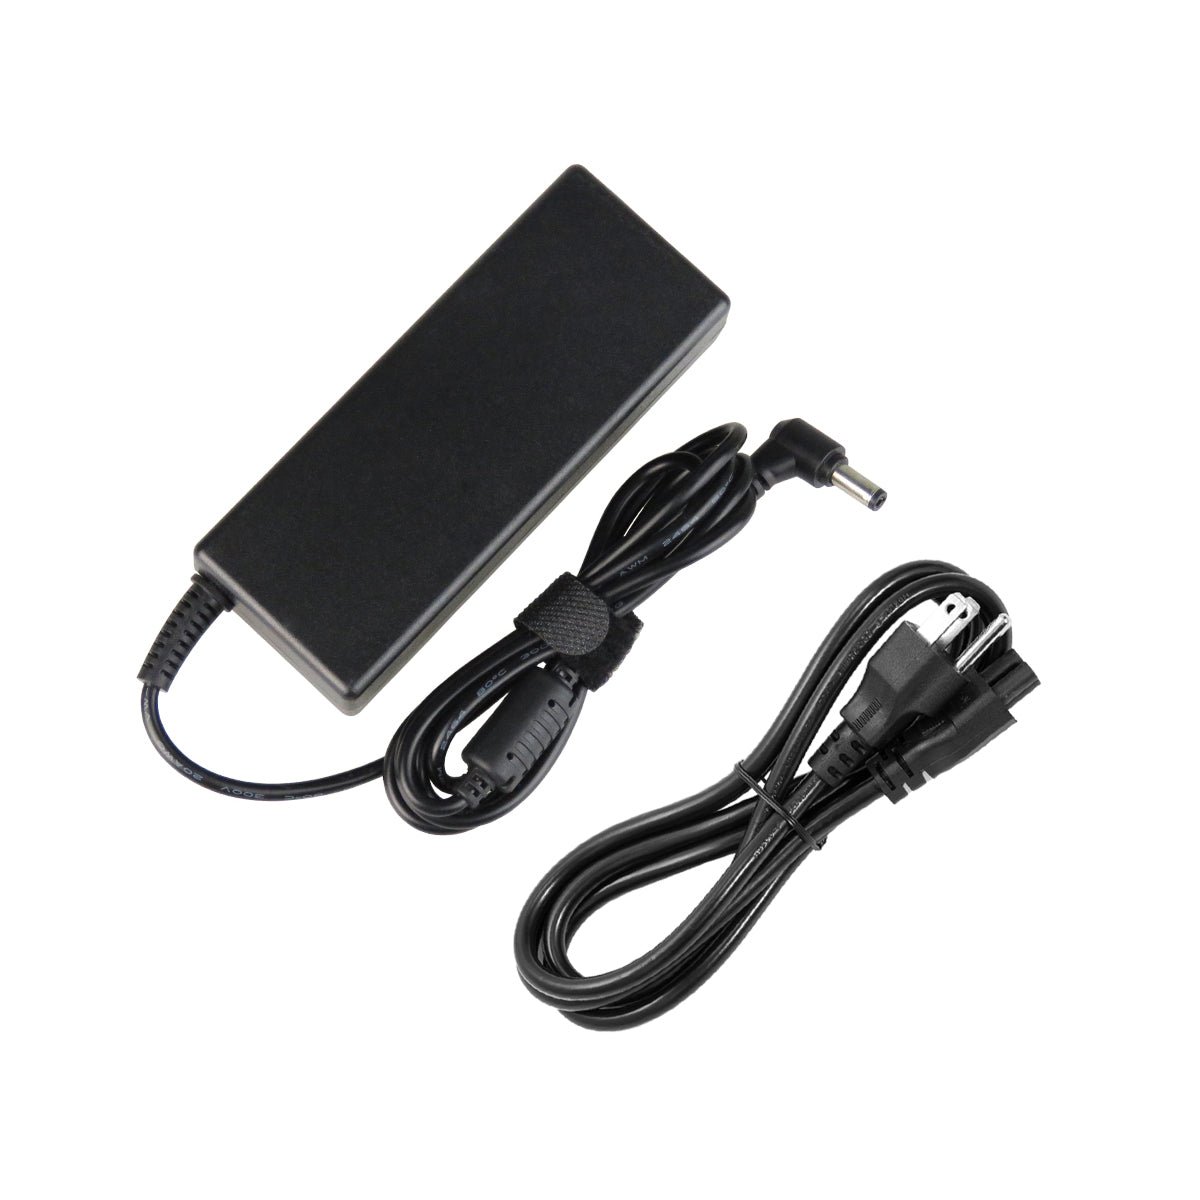 AC Adapter Charger for ASUS K65 Notebook.